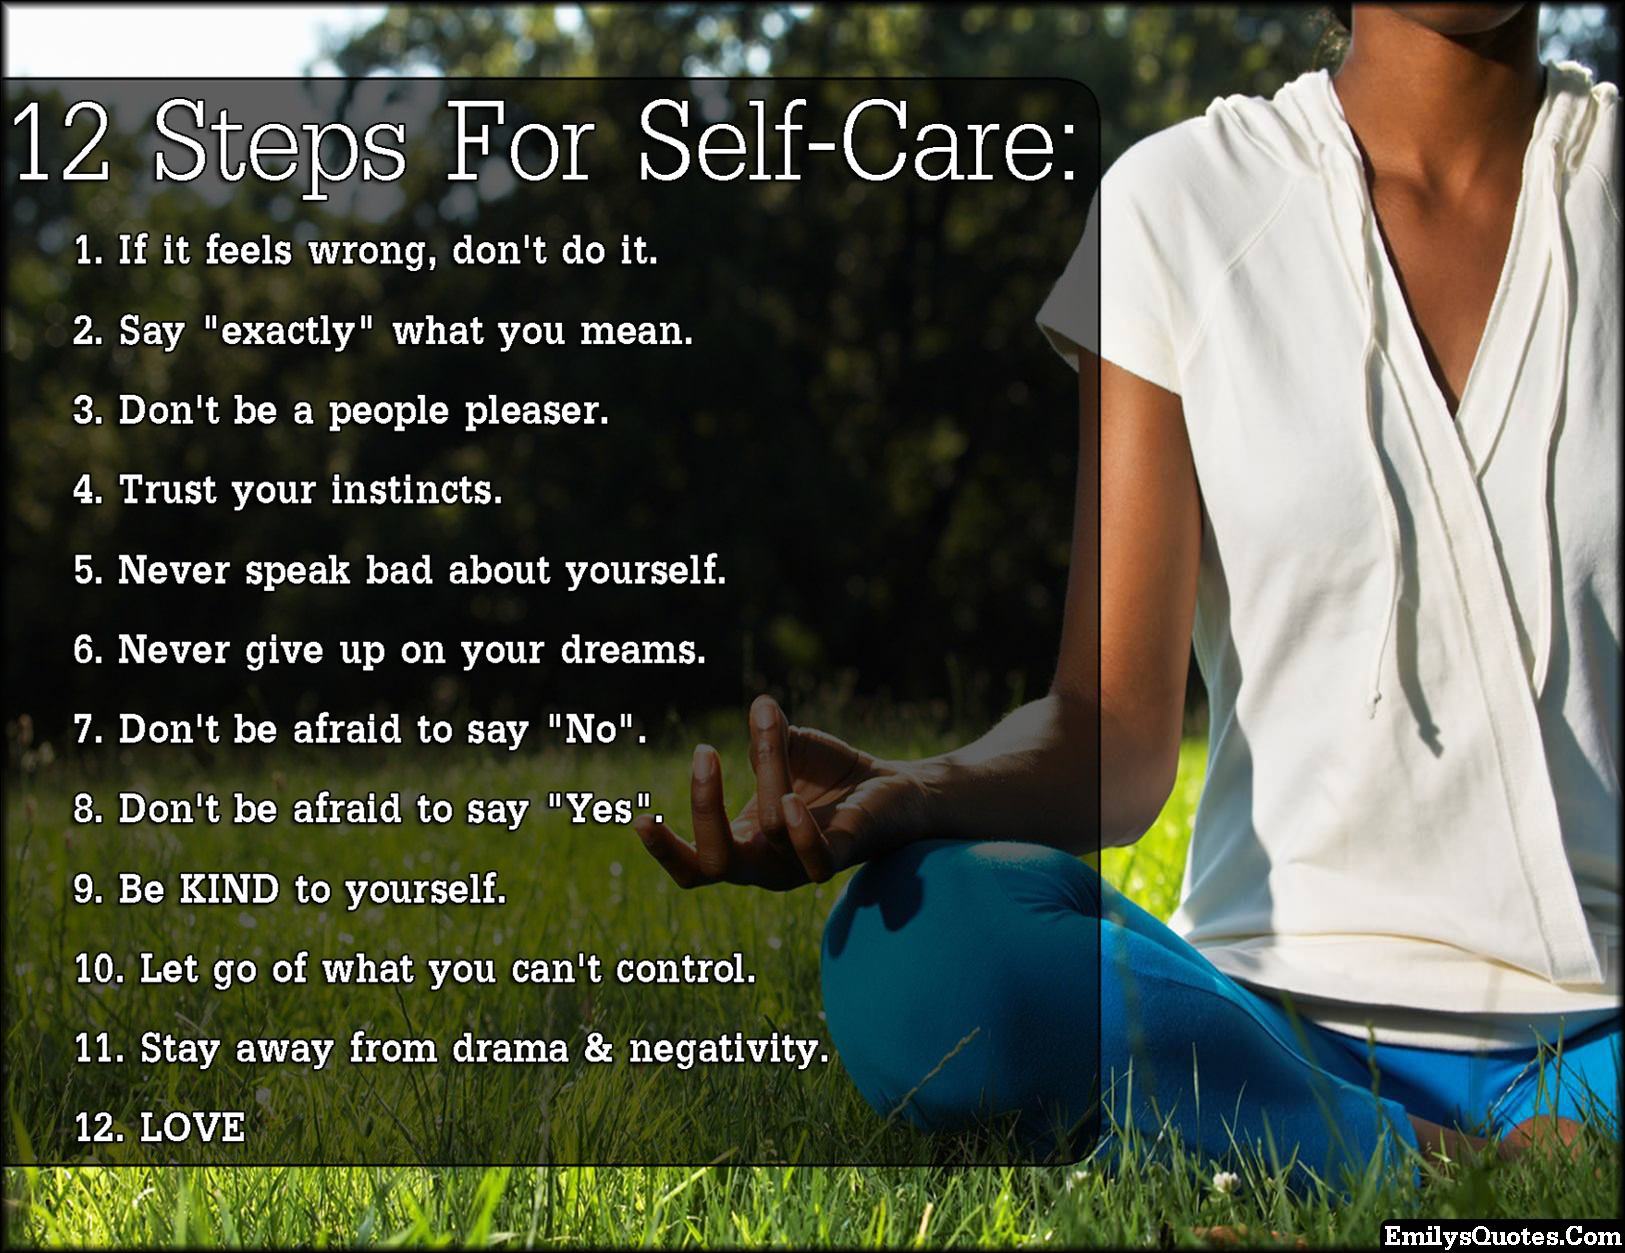 12 Steps For Self-Care: 1. If it feels wrong, don’t do it.  2. Say “exactly” what you mean.  3. Don’t be a people pleaser.  4. Trust your instincts.  5. Never speak bad about yourself.  6. Never give up on your dreams.  7. Don’t be afraid to say “No”.  8. Don’t be afraid to say “Yes”.  9. Be KIND to yourself.  10. Let go of what you can’t control.  11. Stay away from drama & negativity.  12. LOVE